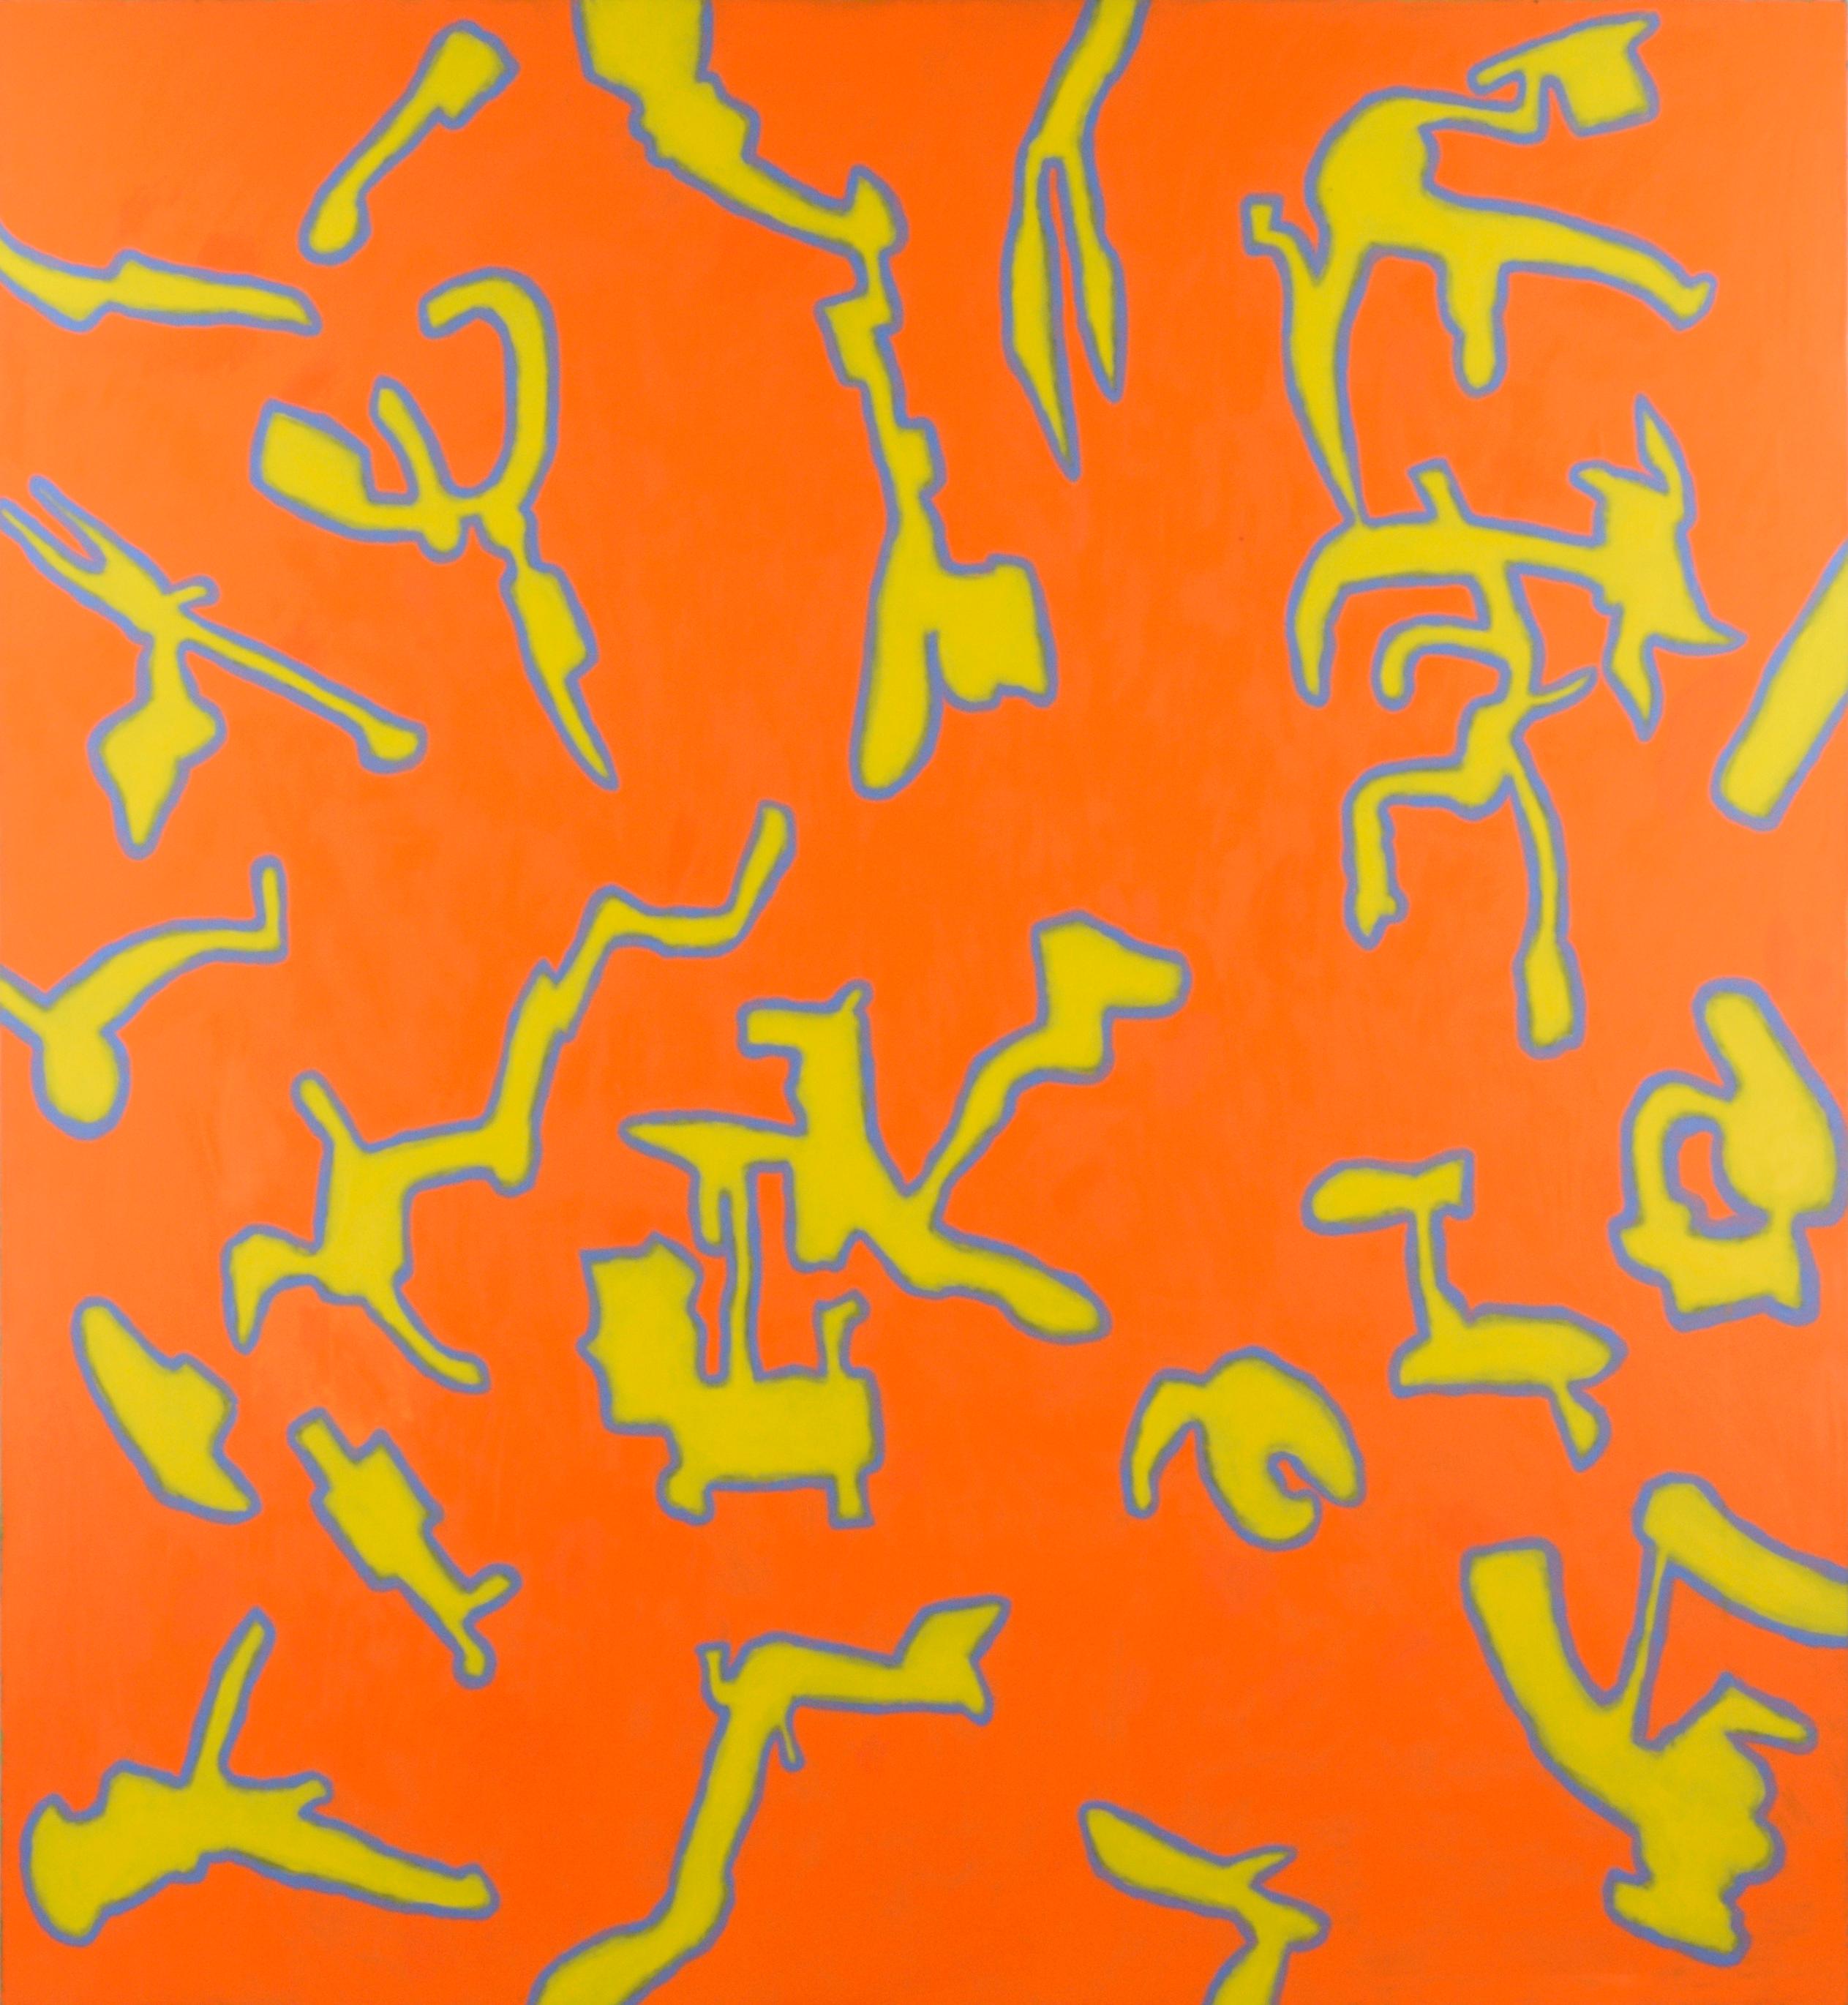 Michael Pauker  Abstract Painting - "Biomorph" Large Scale Orange Abstract